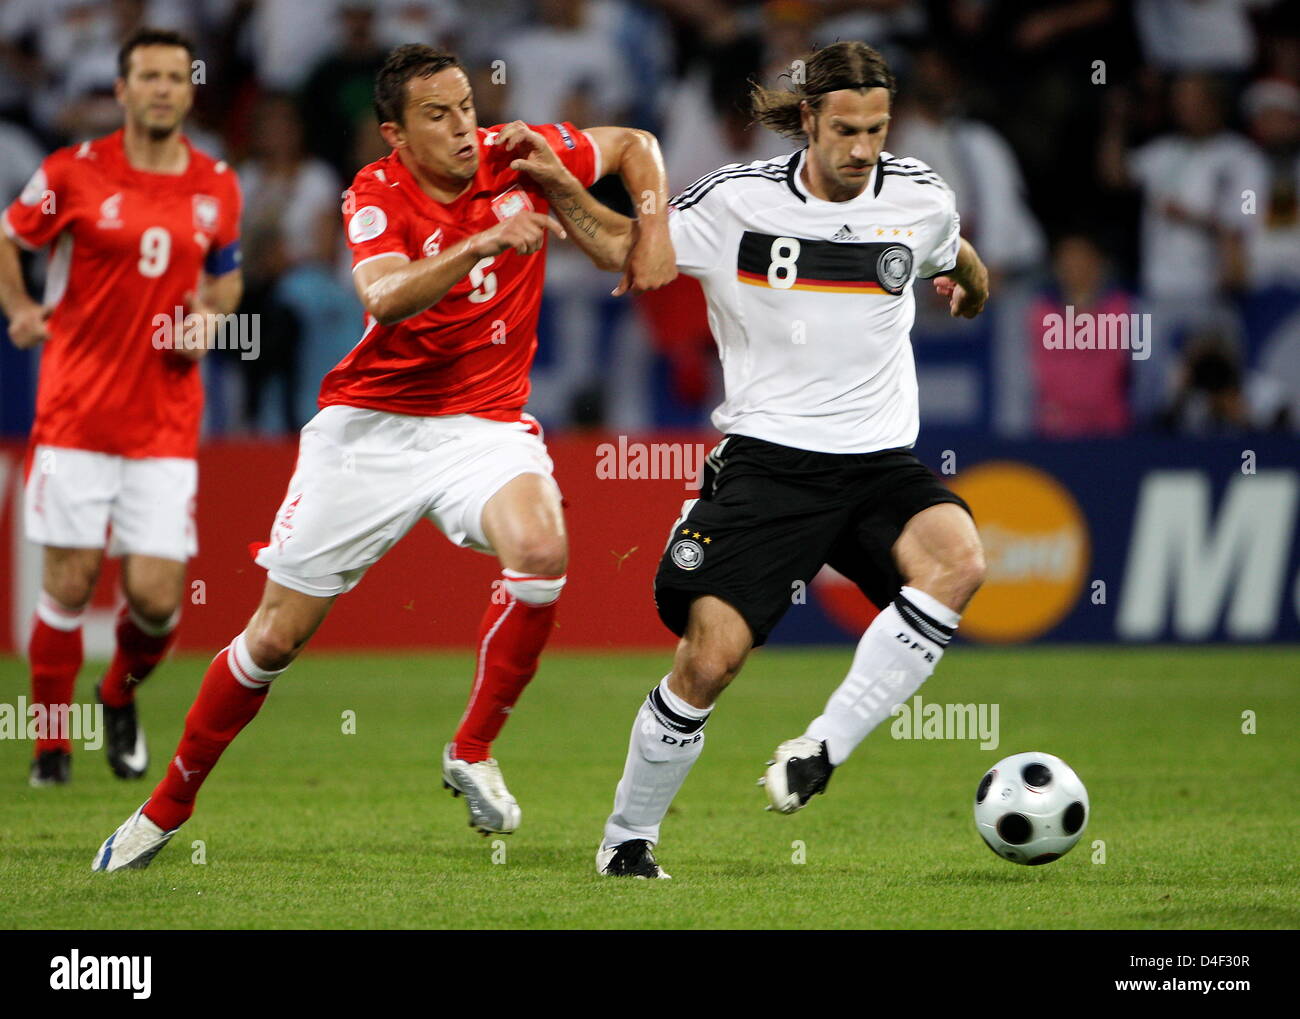 Torsten Frings (r) of Germany vies with Dariusz Dudka of Poland during the EURO 2008 preliminary round group B match in Woerthersee Stadium, Klagenfurt, Austria, 08 June 2008. Photo: Oliver Berg dpa +please note UEFA restrictions particularly in regard to slide shows and 'No Mobile Services'+ +++(c) dpa - Bildfunk+++ Stock Photo